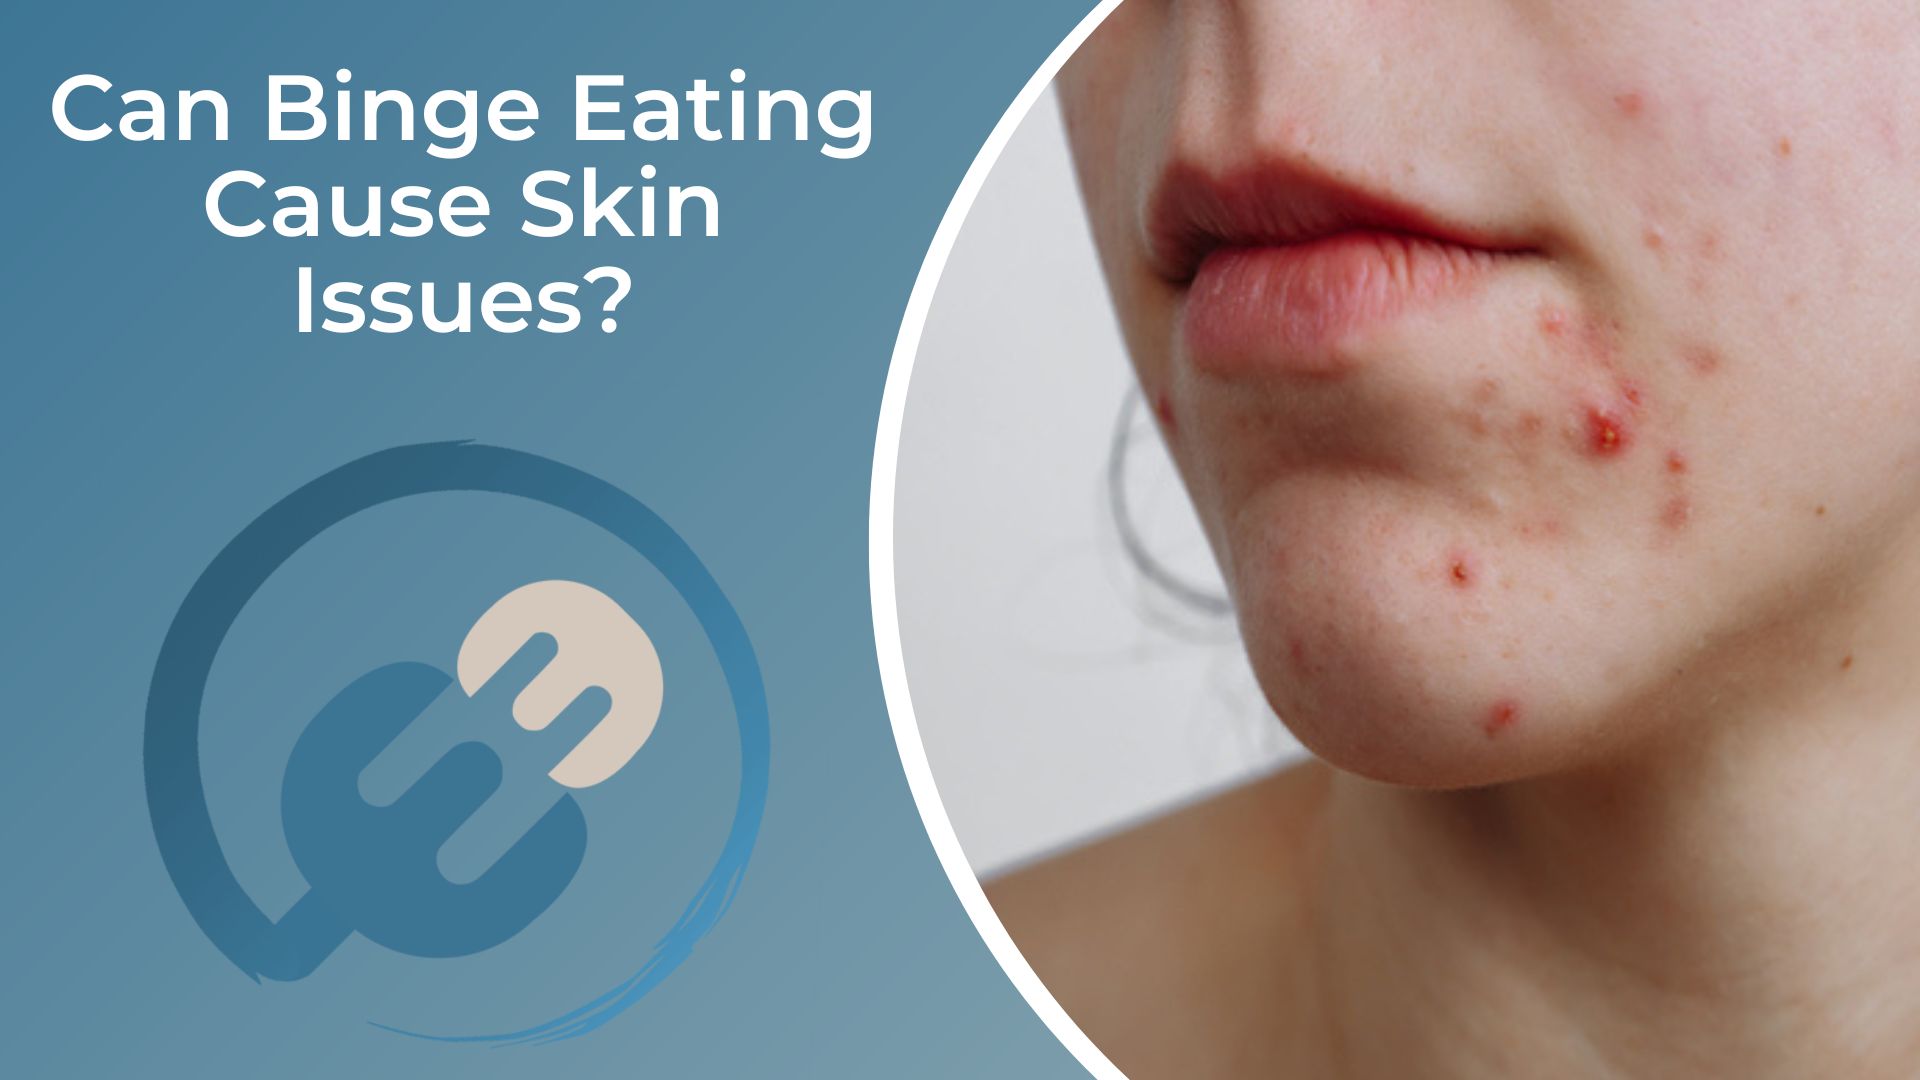 Can Binge Eating Cause Skin Issues